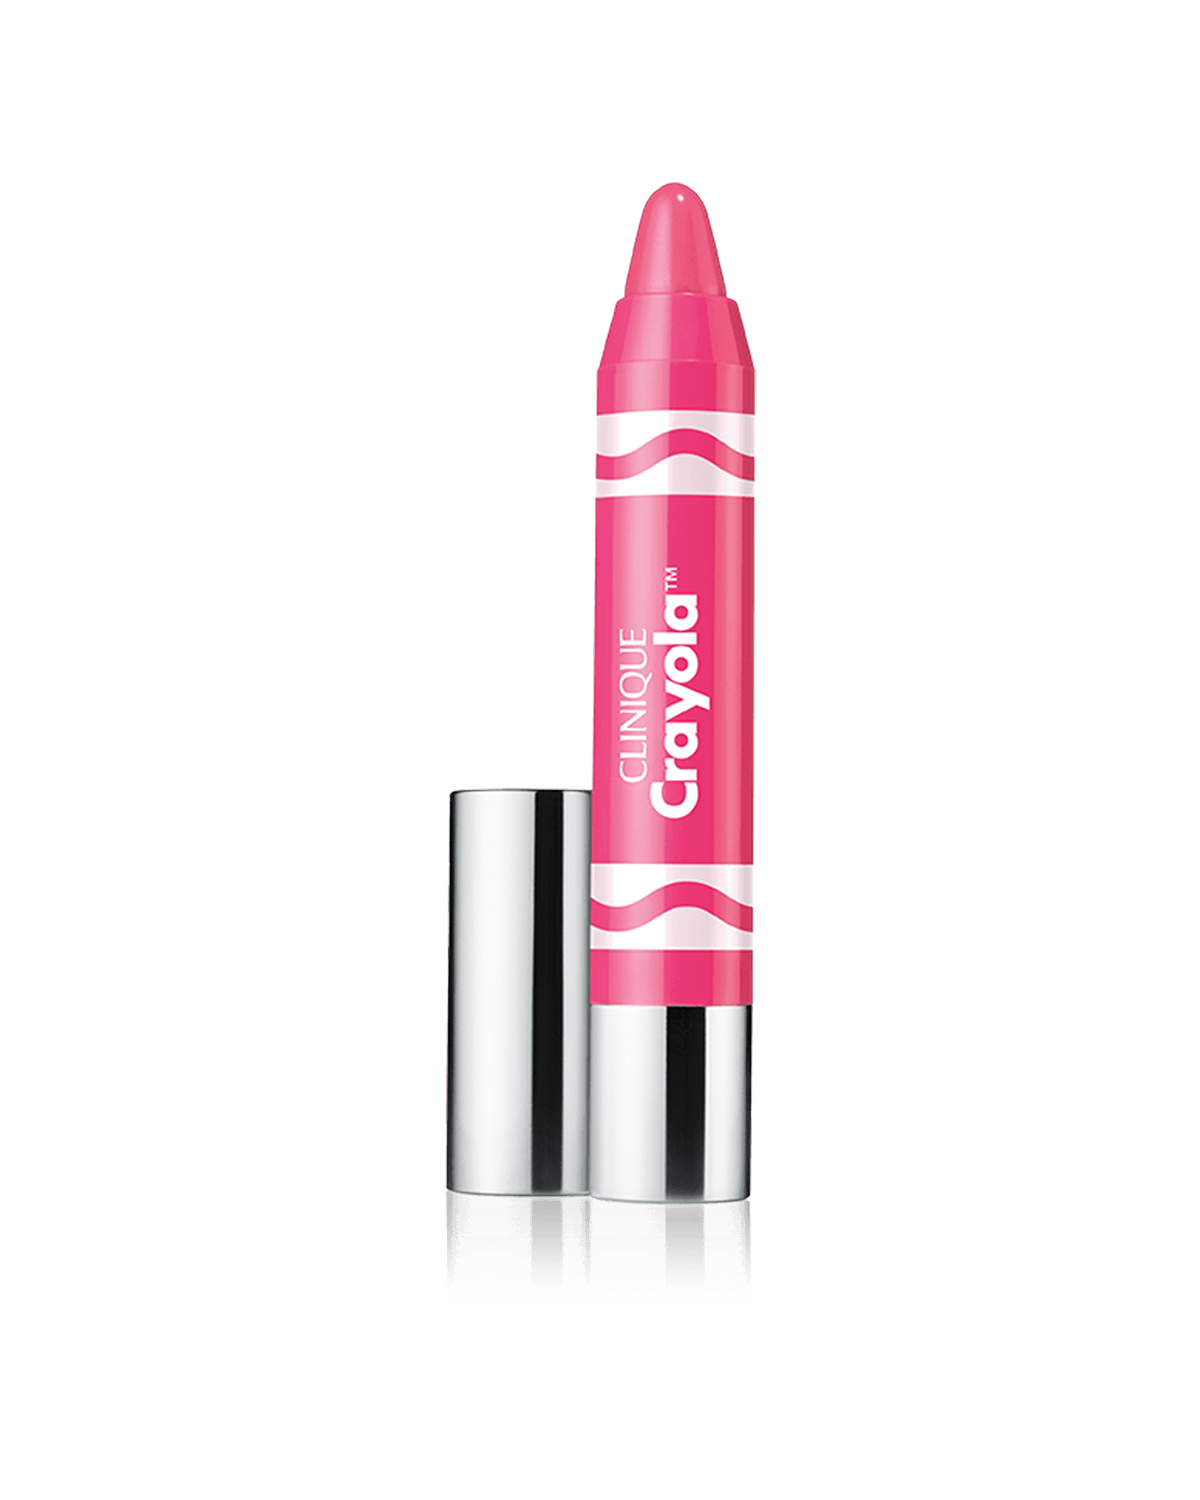 Crayola™ for Clinique Chubby Stick™ For Lips